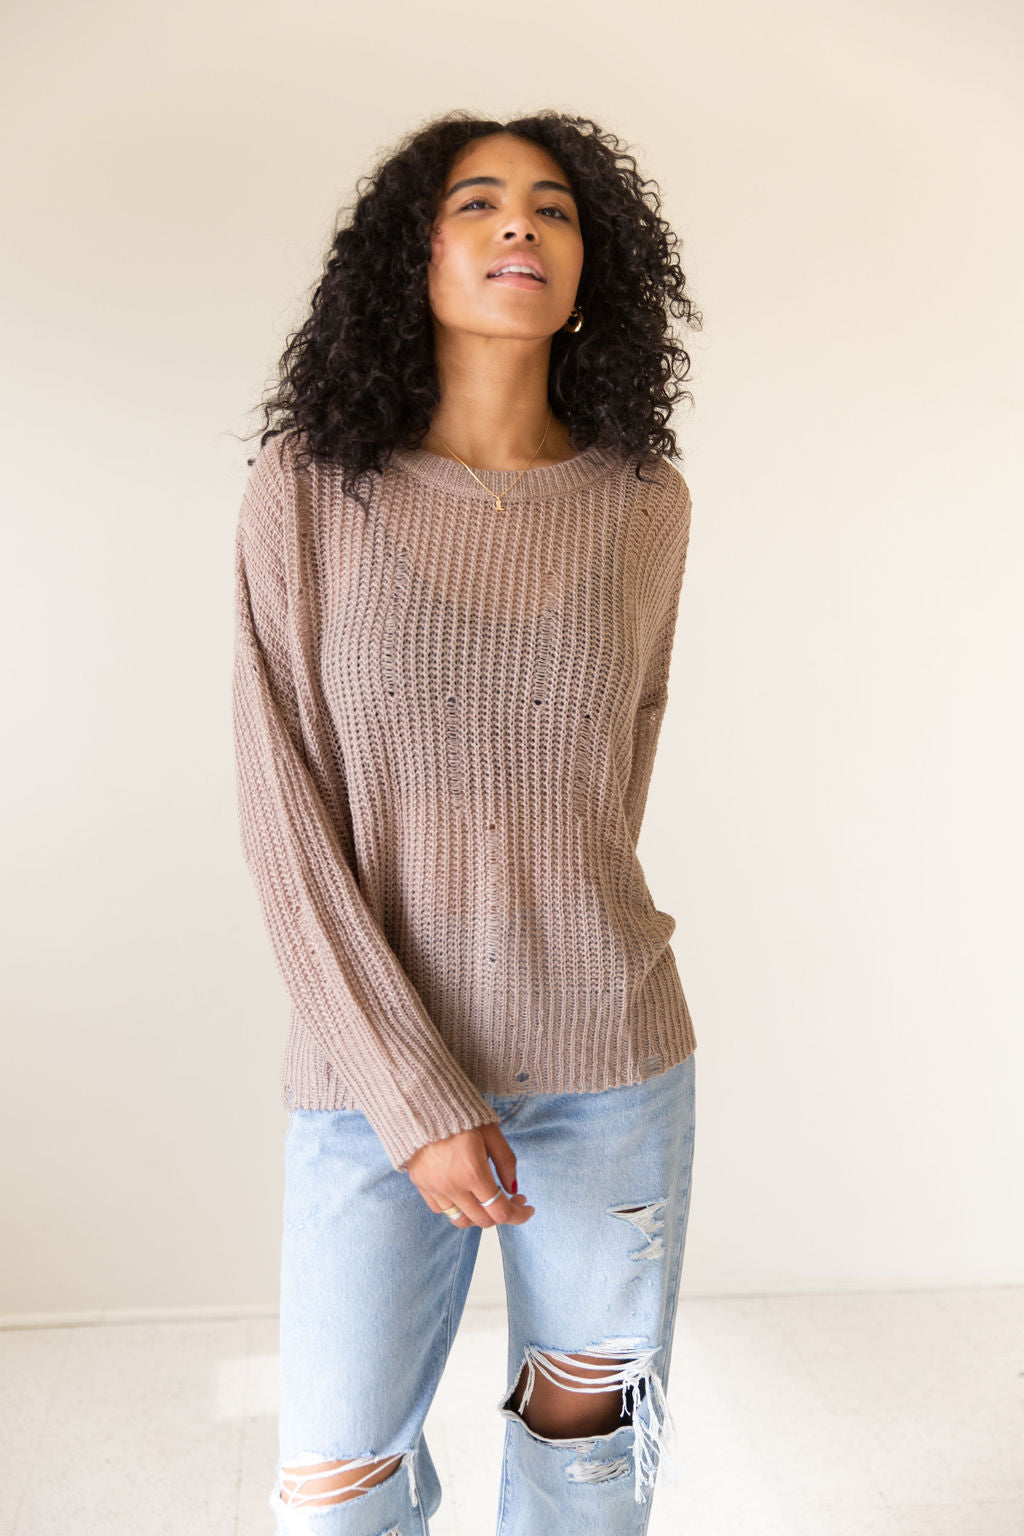 Always Smiling Distress Knit Sweater by For Good